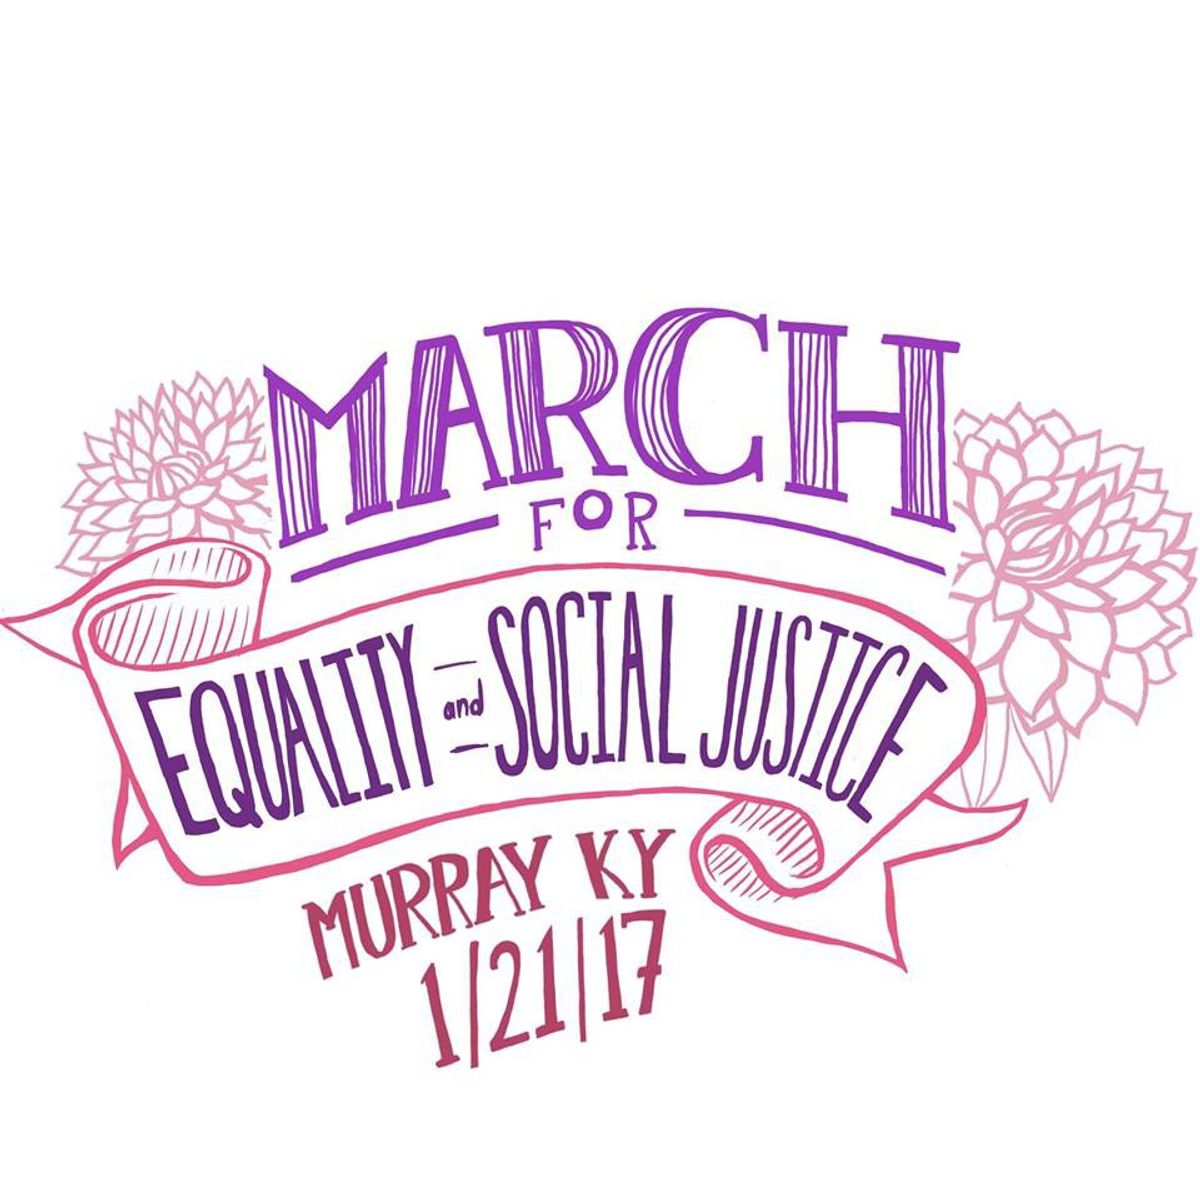 The March For Equality And Social Justice